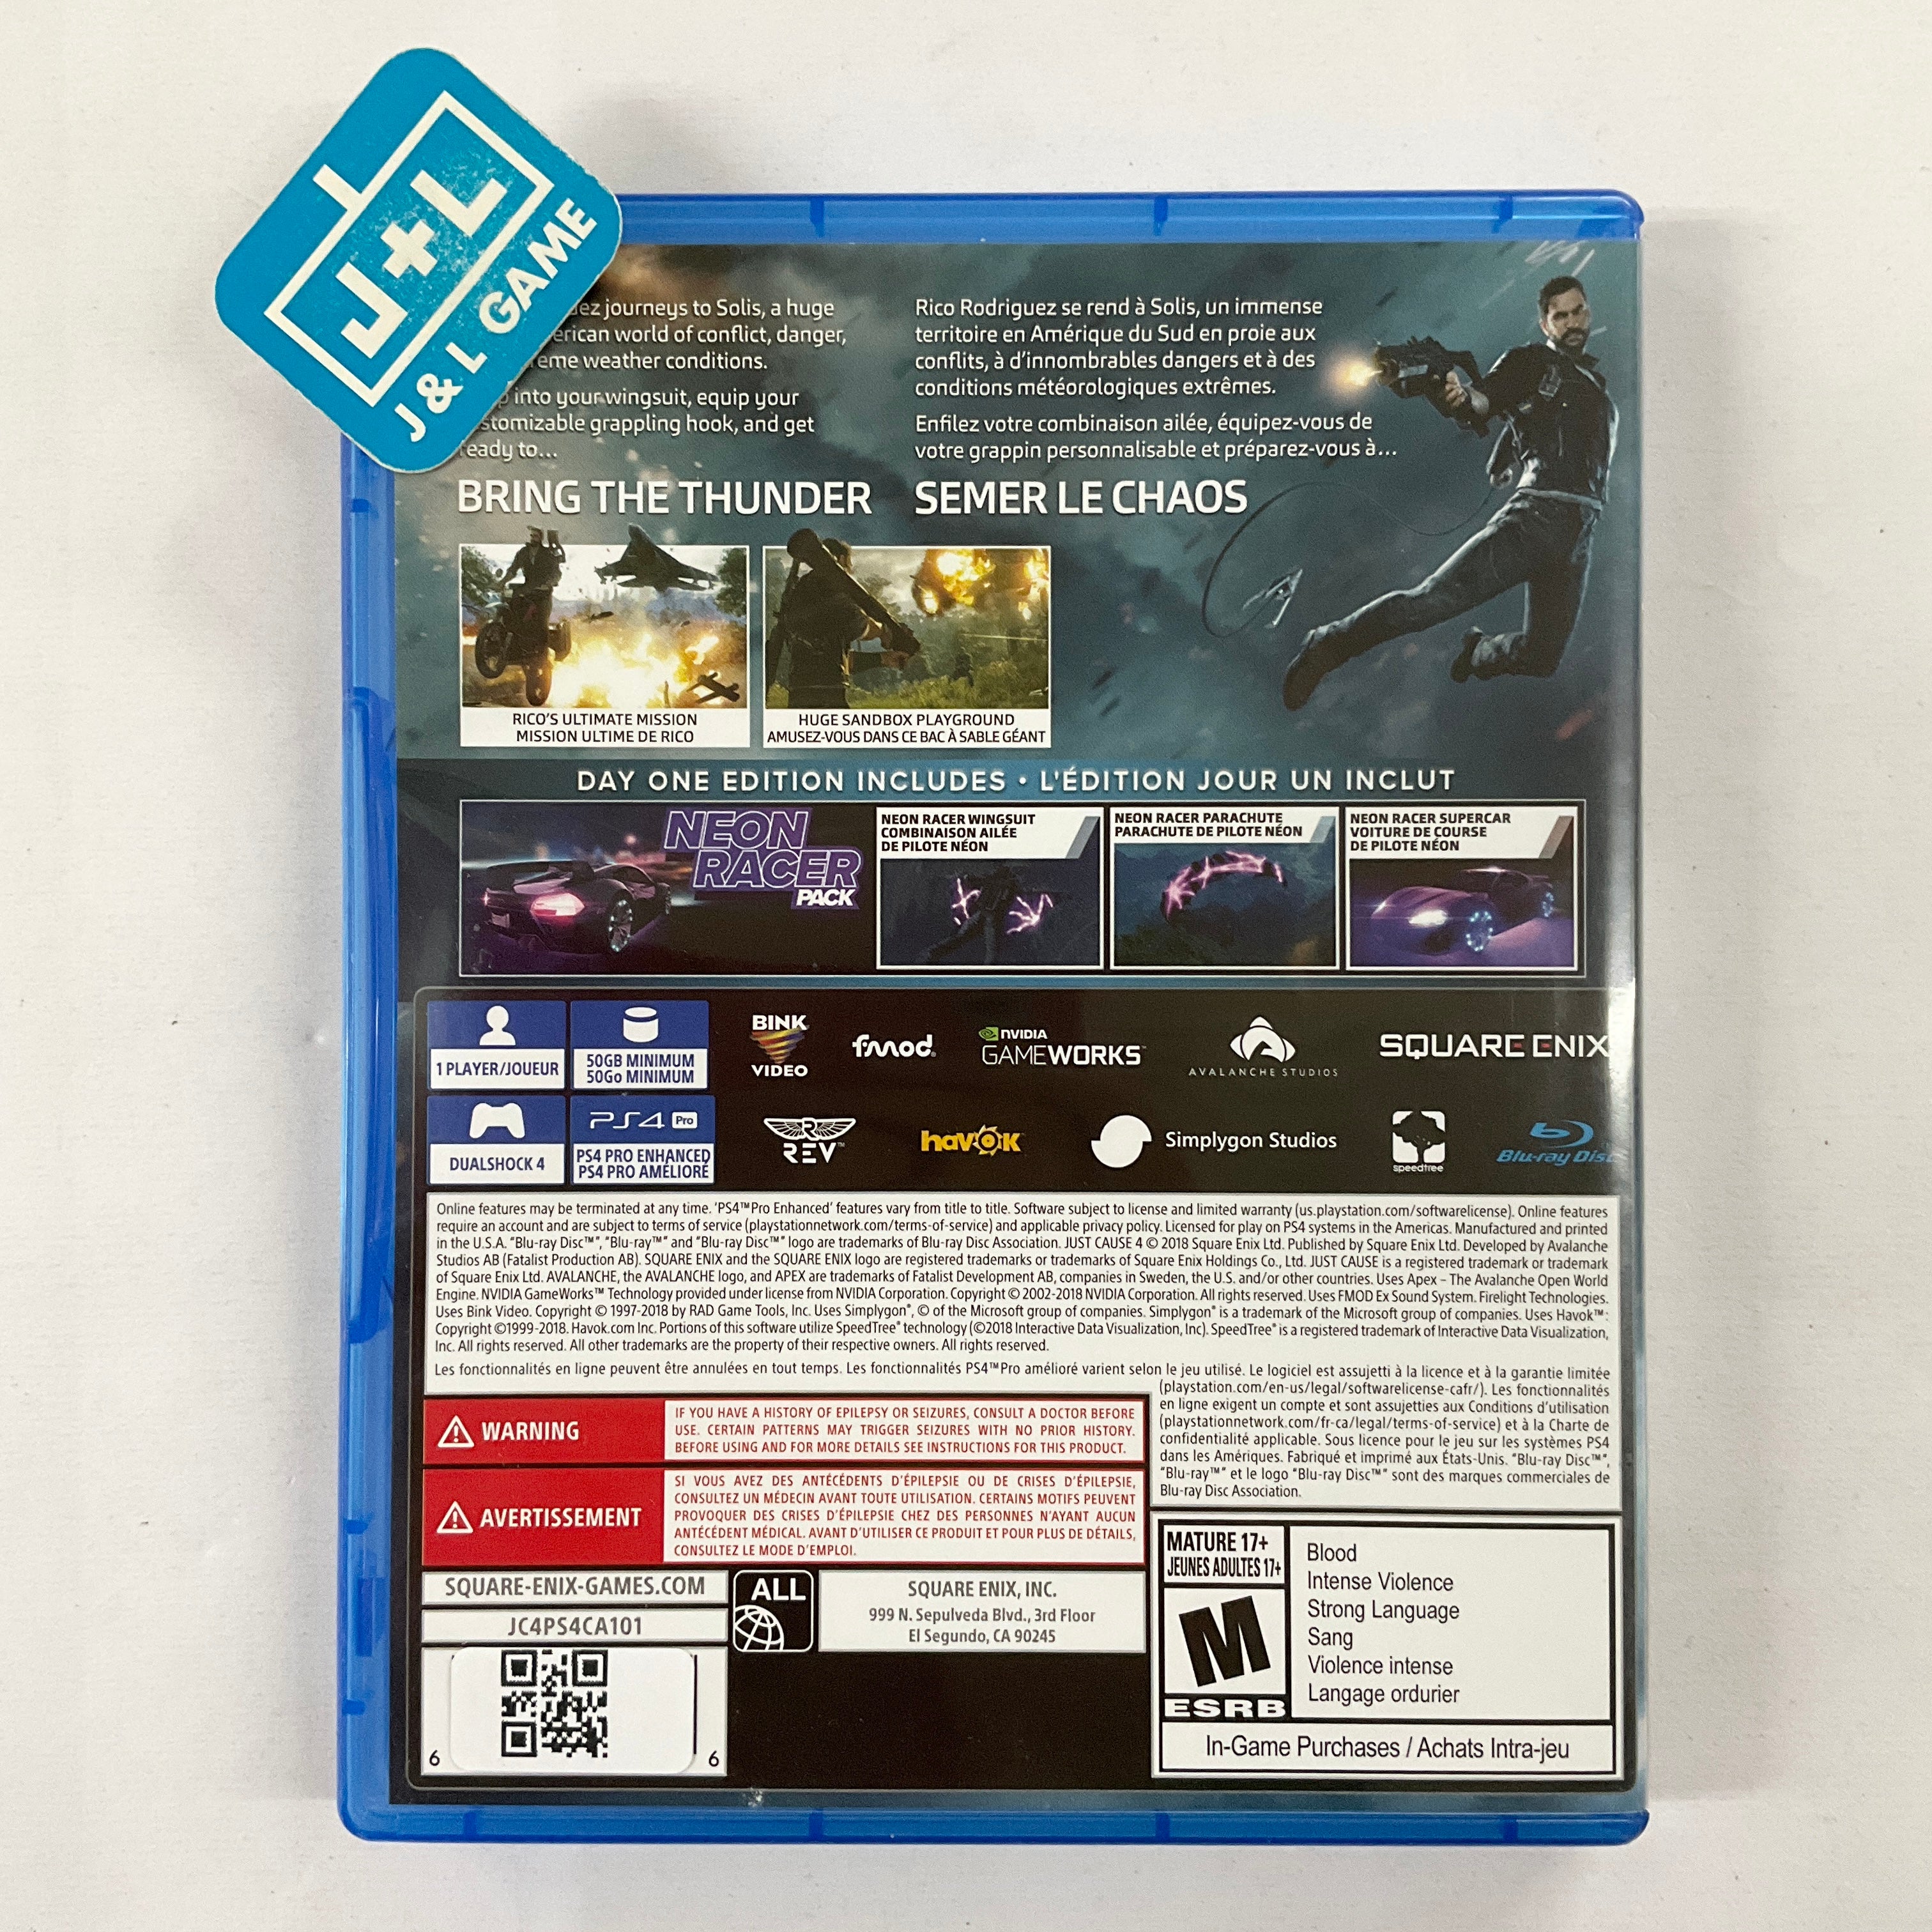 Just Cause 4 - (PS4) PlayStation 4 [Pre-Owned] Video Games Square Enix   